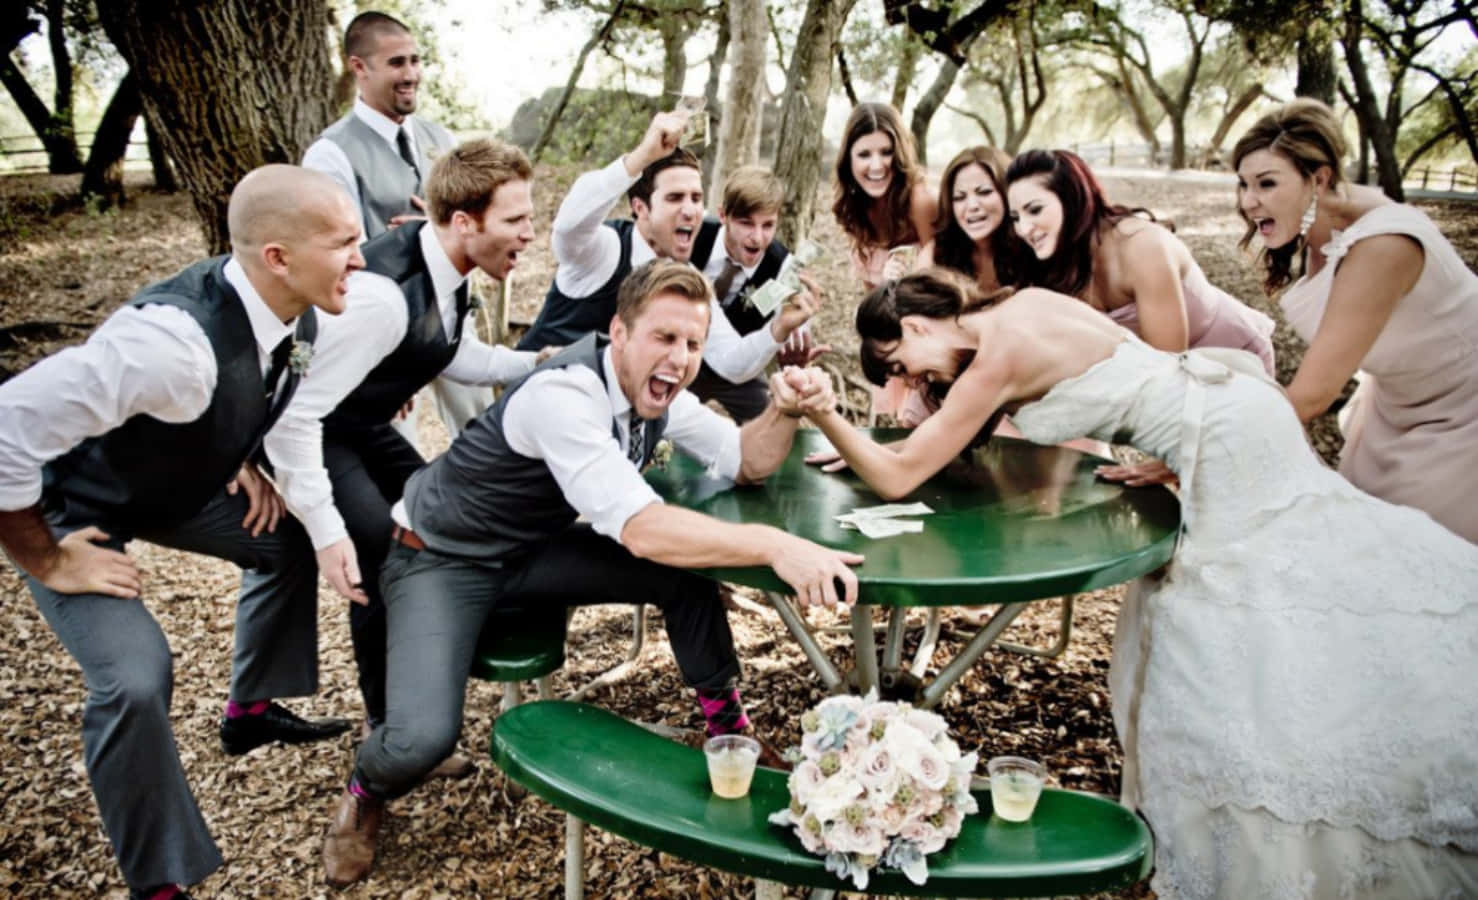 Download Funny Wedding Pictures 1478 x 900 